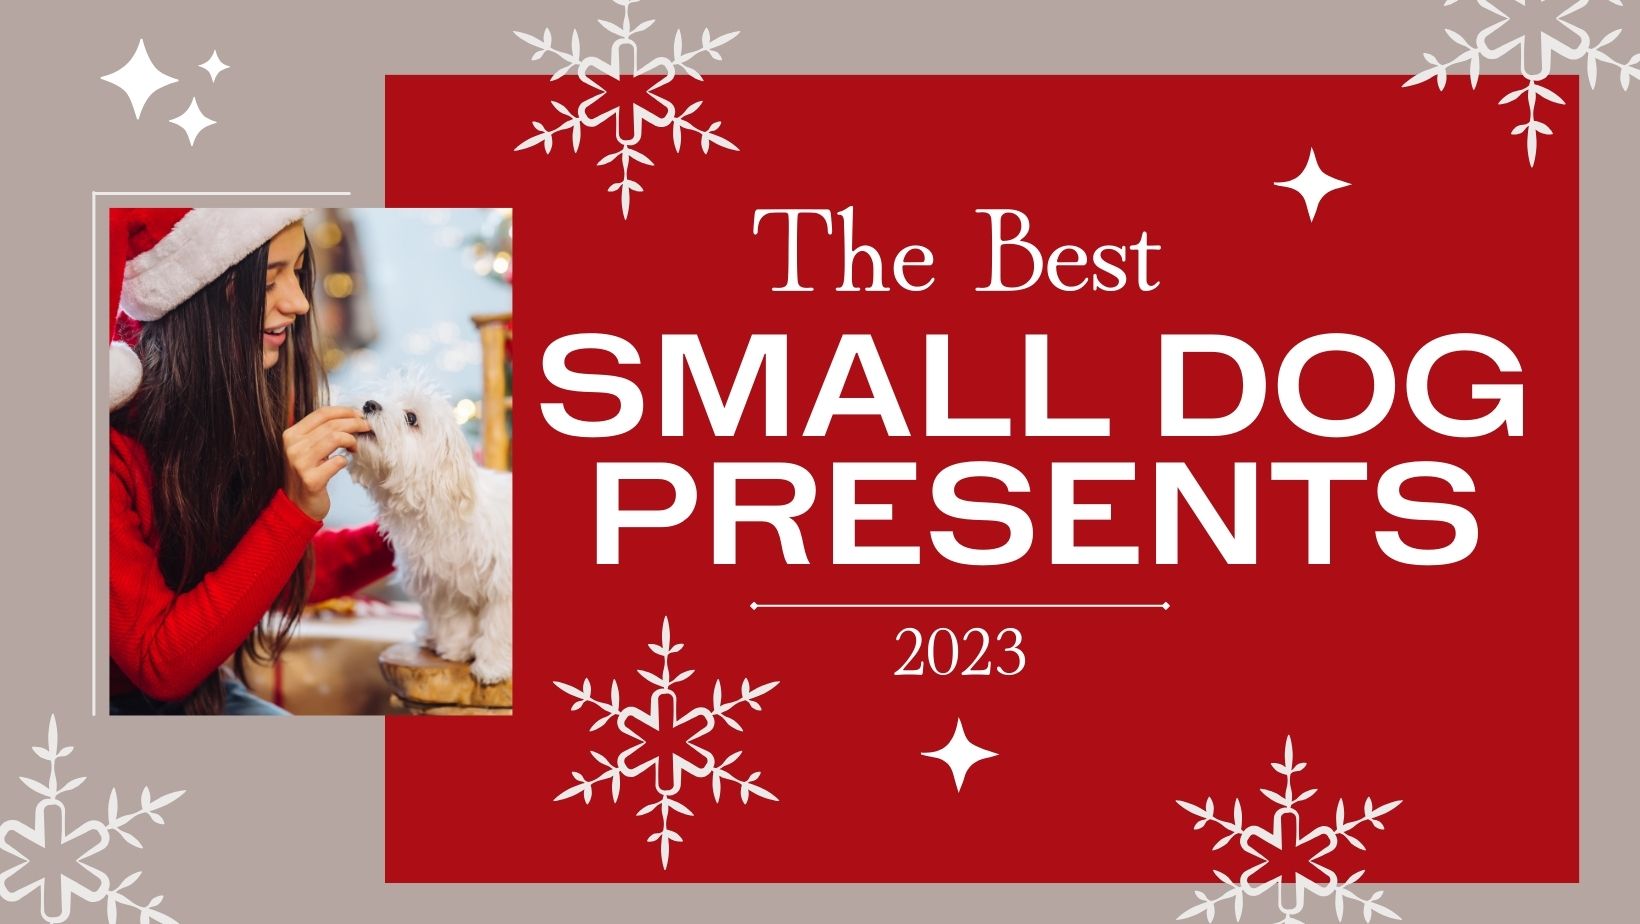 Decorative photo with smiling woman in christmas hat feeding treat to small dog. Text reads "The Best Small Dog Presents 2023"